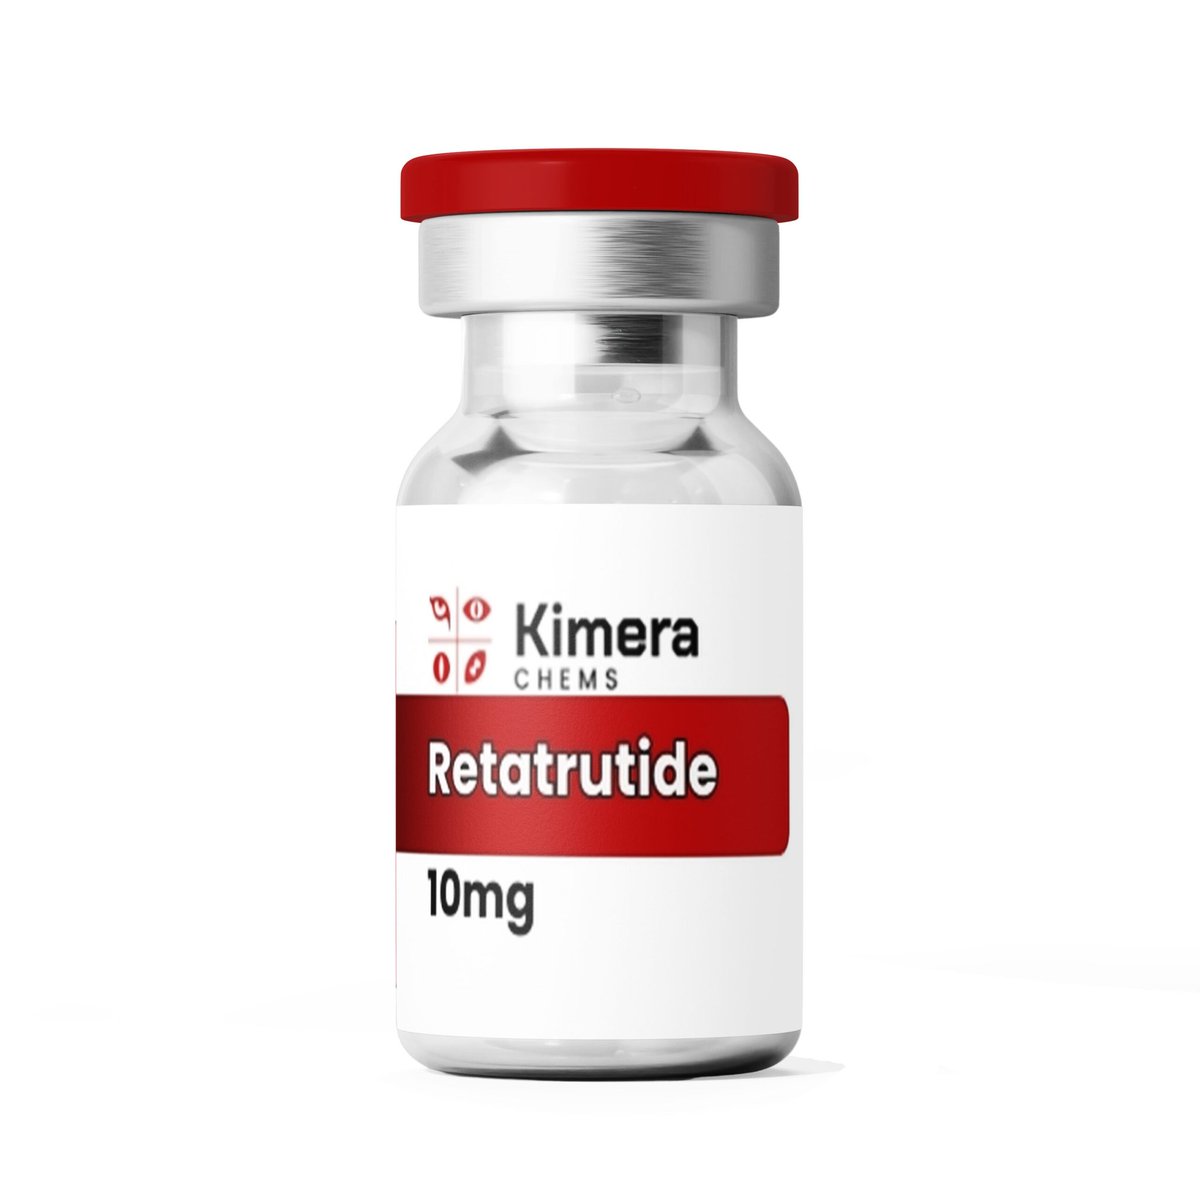 Retatrutide (LY-3437943) holds promise in addressing conditions like autoimmune diseases, inflammation, and even certain types of cancer. 🩺⚕️

Buy now at kimerachems.co/product/retatr…

#Research #Retatrutide #LY3437943 #Innovation #Biomedicine #AutoimmuneDiseases #Inflammation